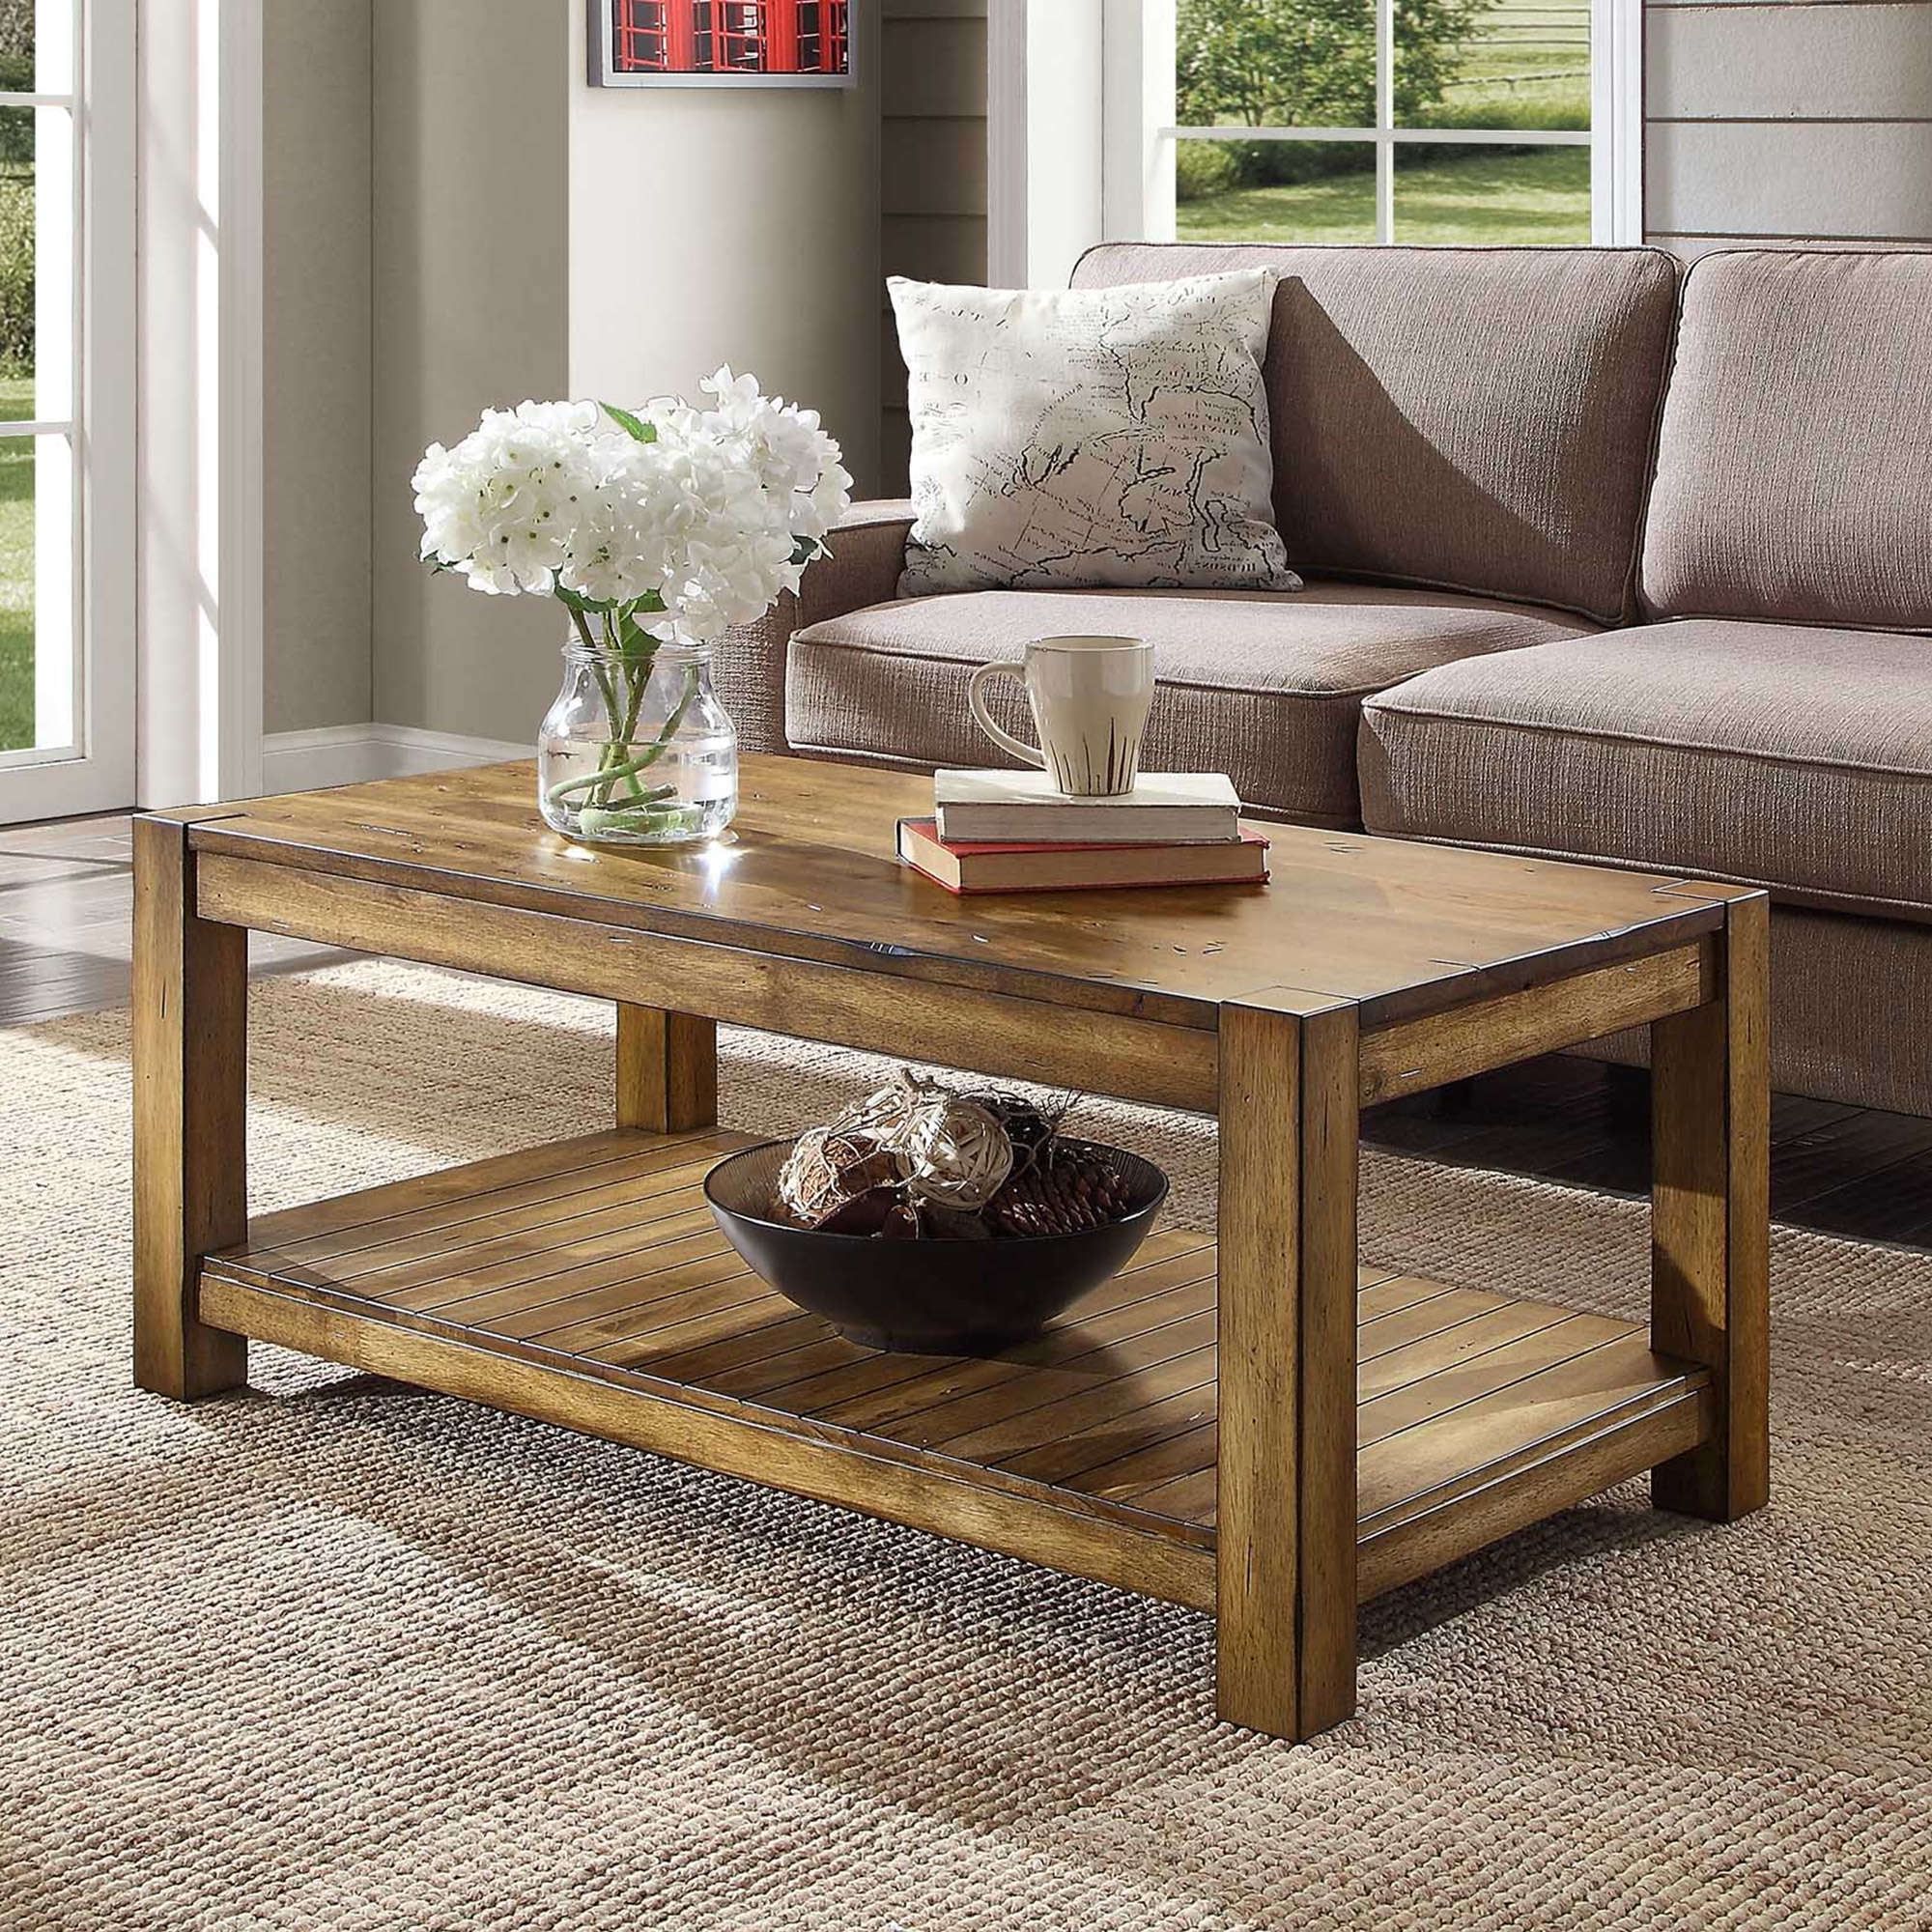 Better Homes & Gardens Bryant Solid Wood Coffee Table, Rustic Maple Pertaining To Preferred Rustic Coffee Tables (View 10 of 15)